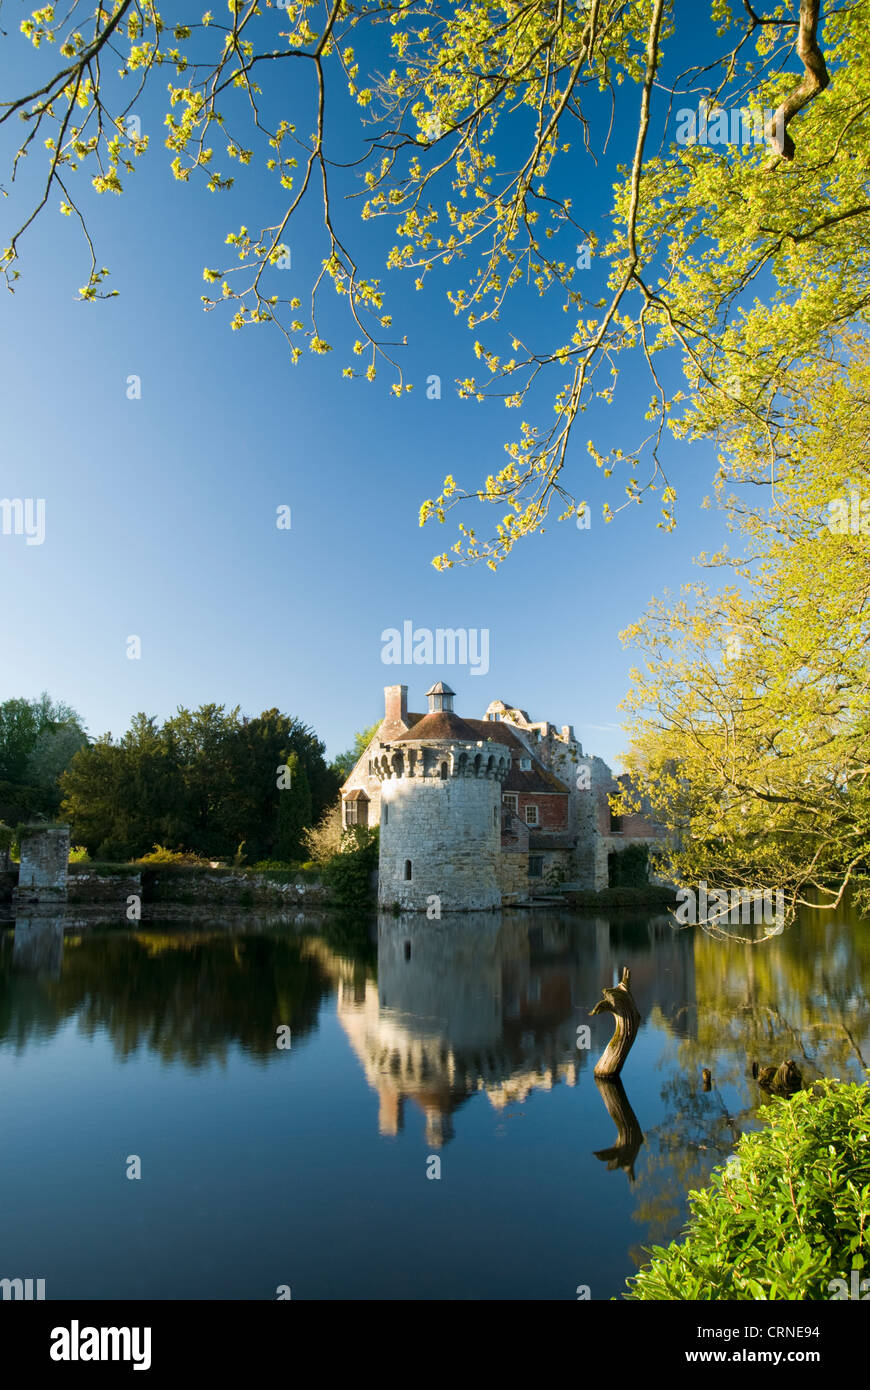 Scotney Castle, a 14th century medieval castle reflected in the moat. Stock Photo